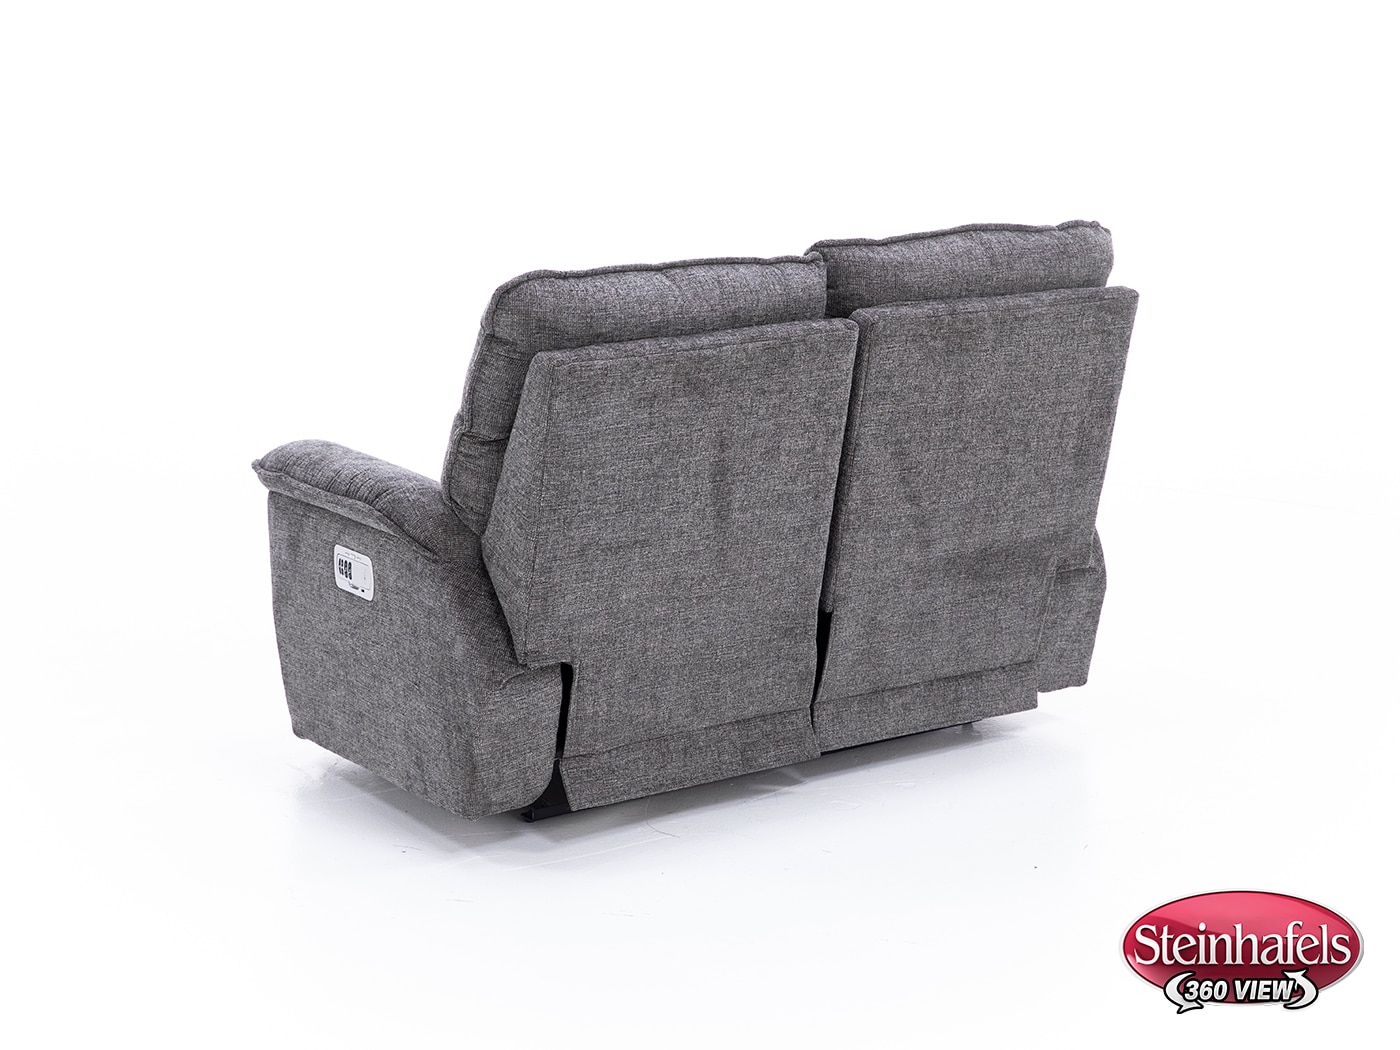 Jay Power Headrest Reclining Loveseat With Dual Wireless Remotes 